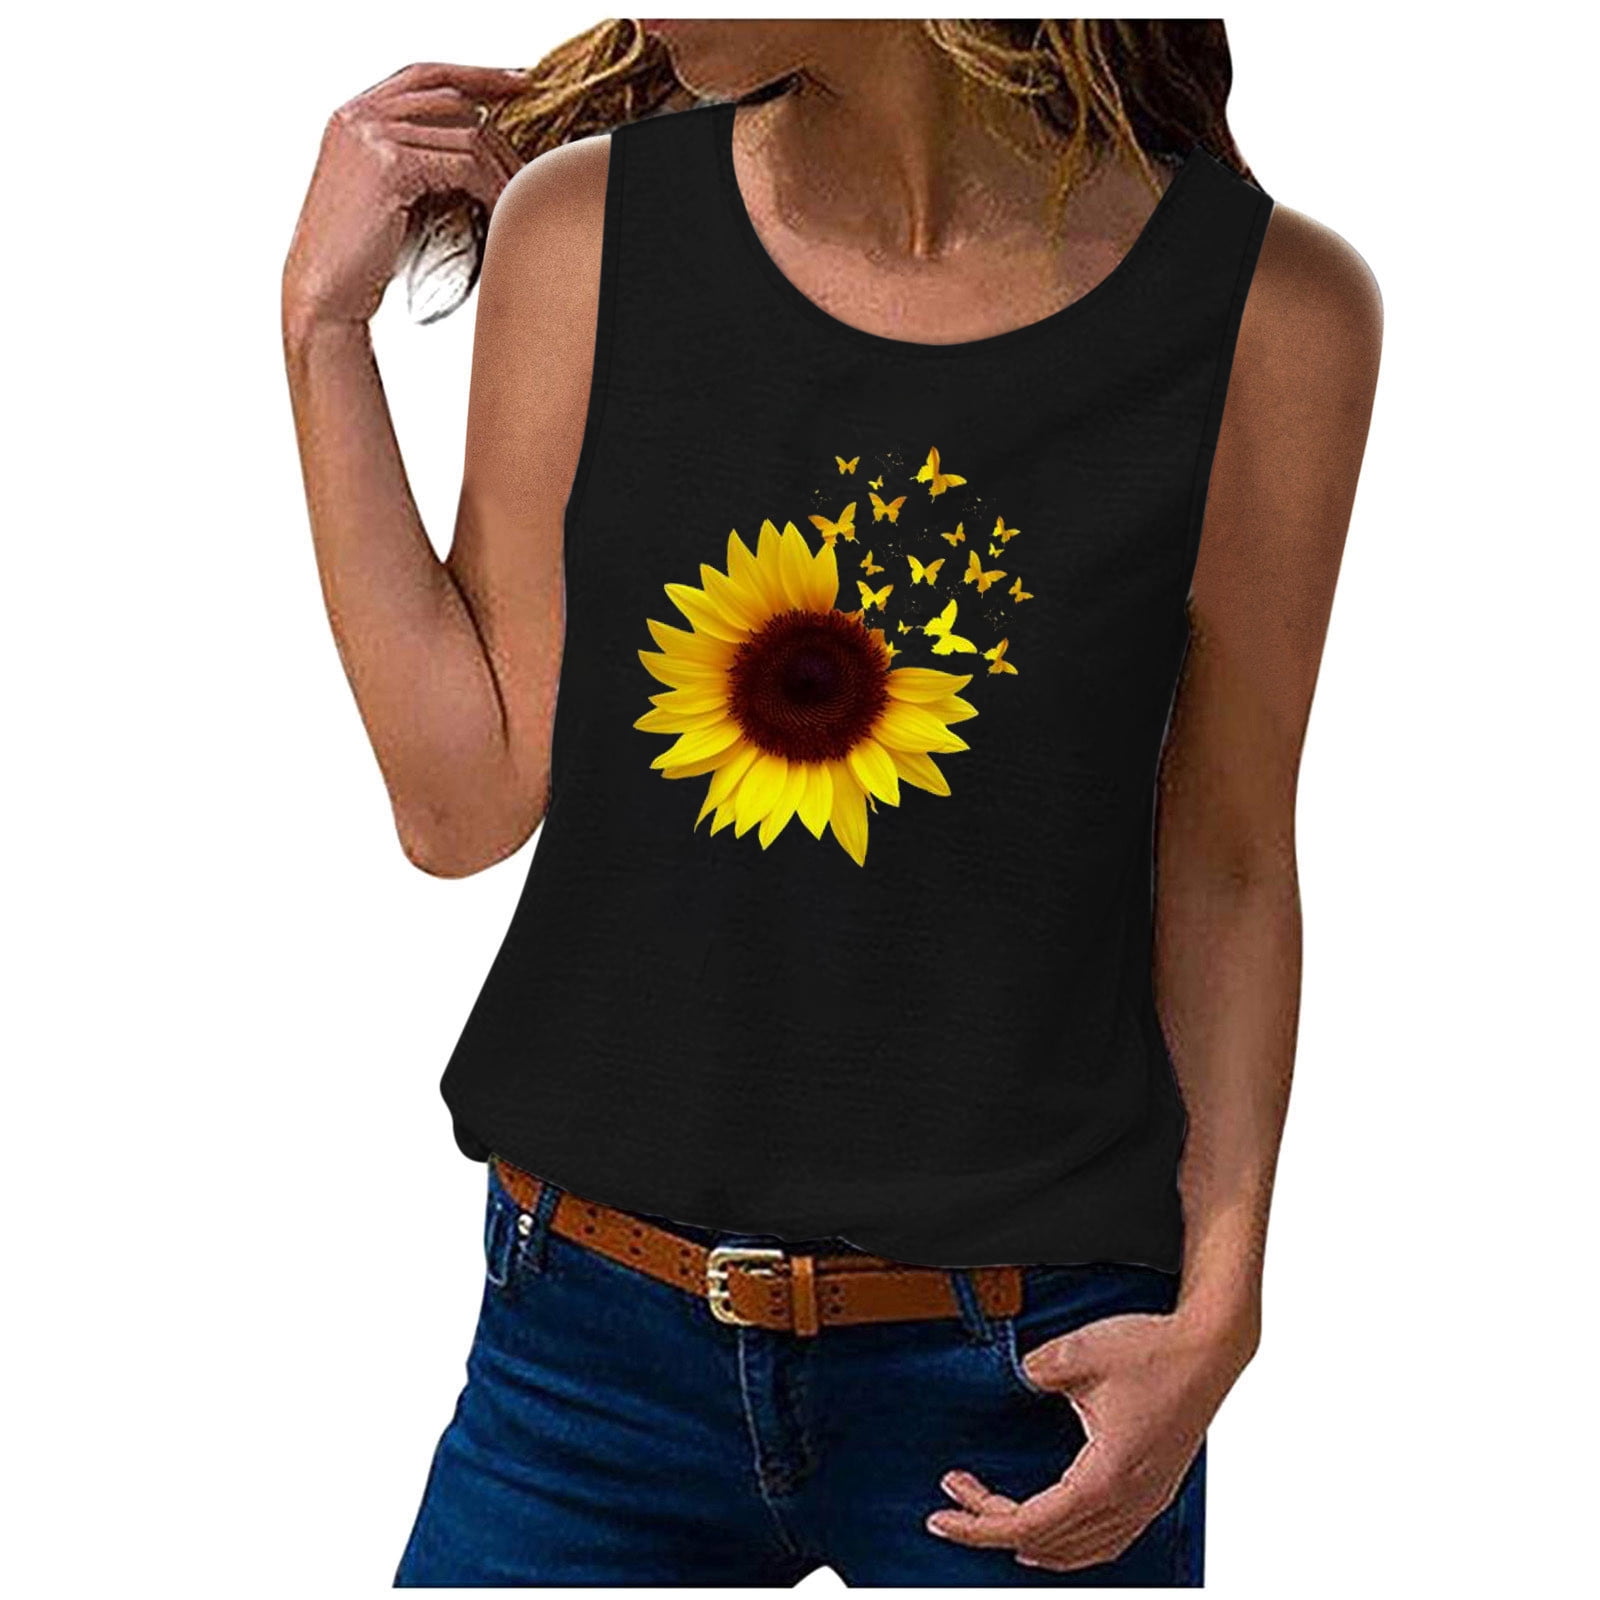 JGGSPWM Sunflower Tank Tops for Women Cute Comfy Camisole Vest Casual ...